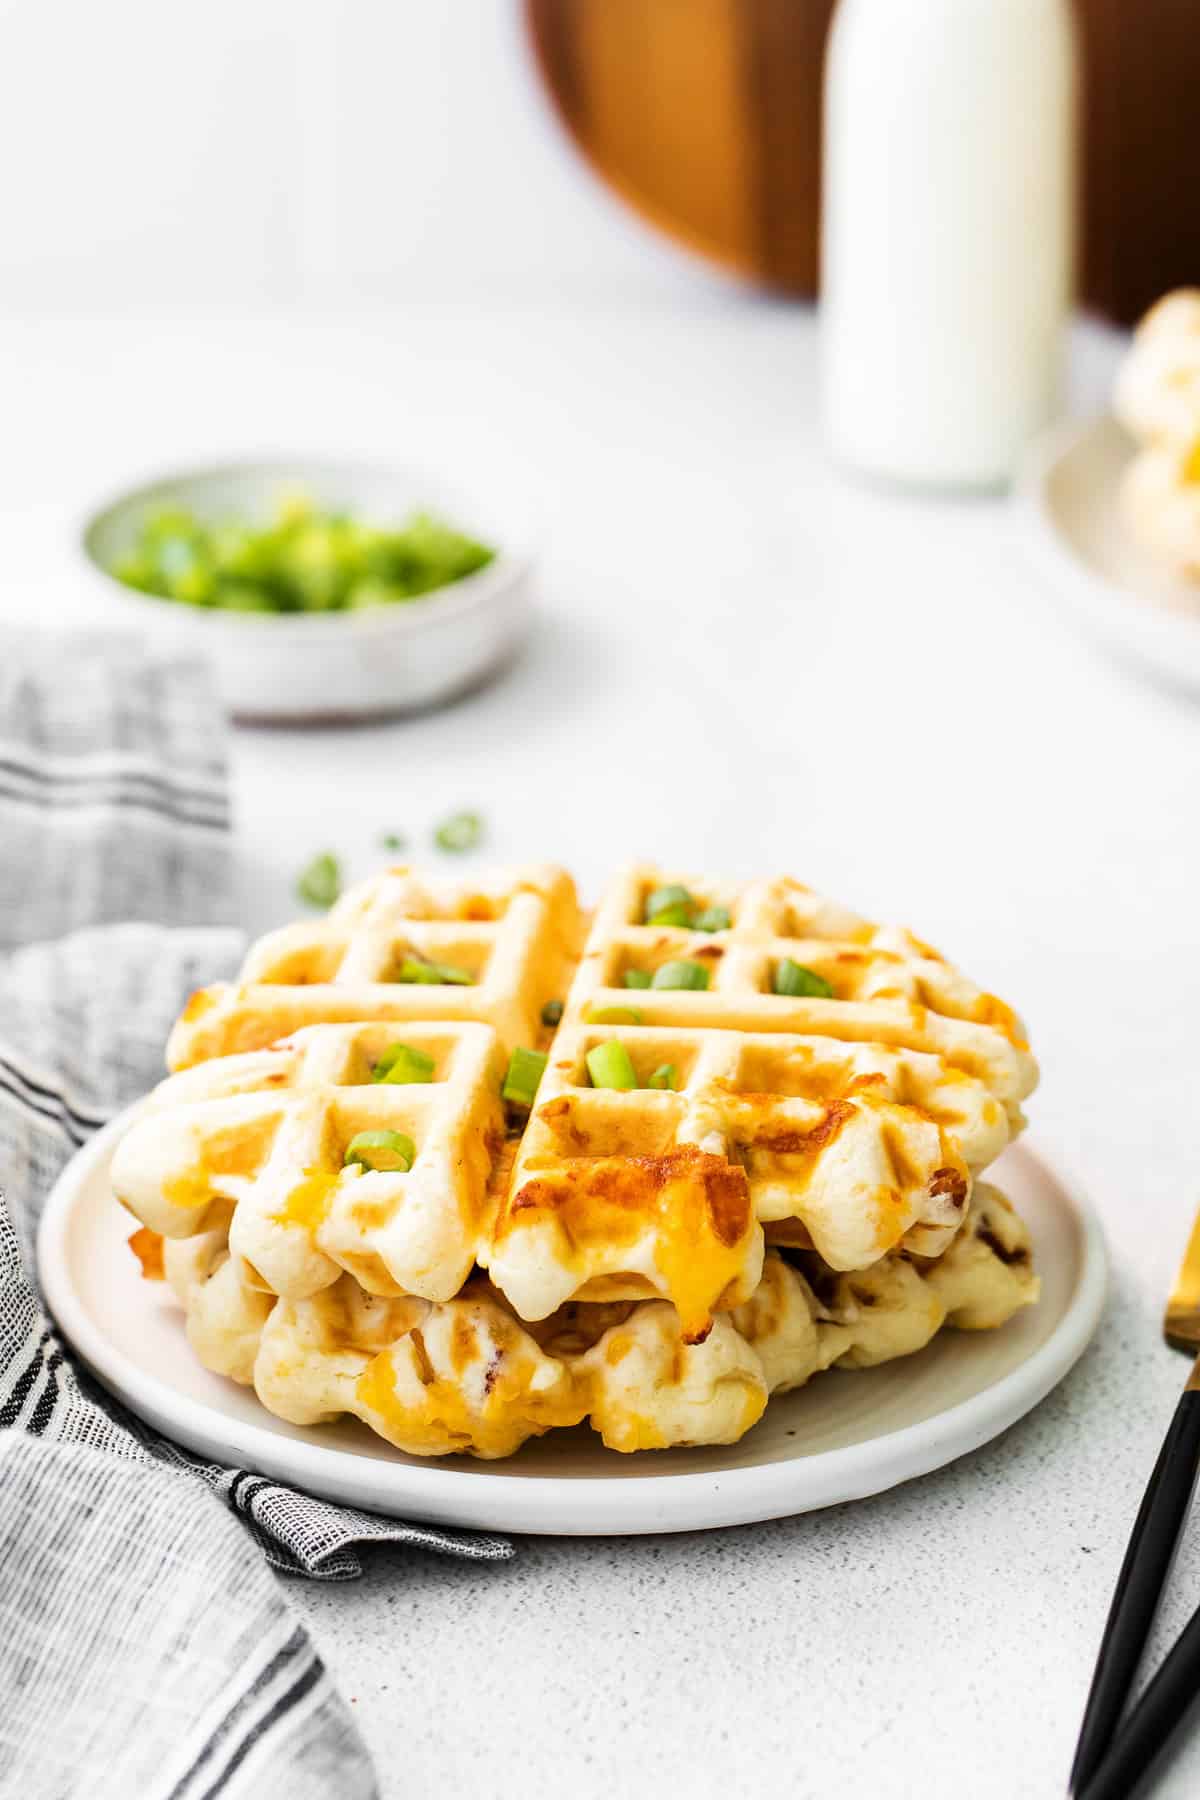 Two savory waffles stacked on a plate.